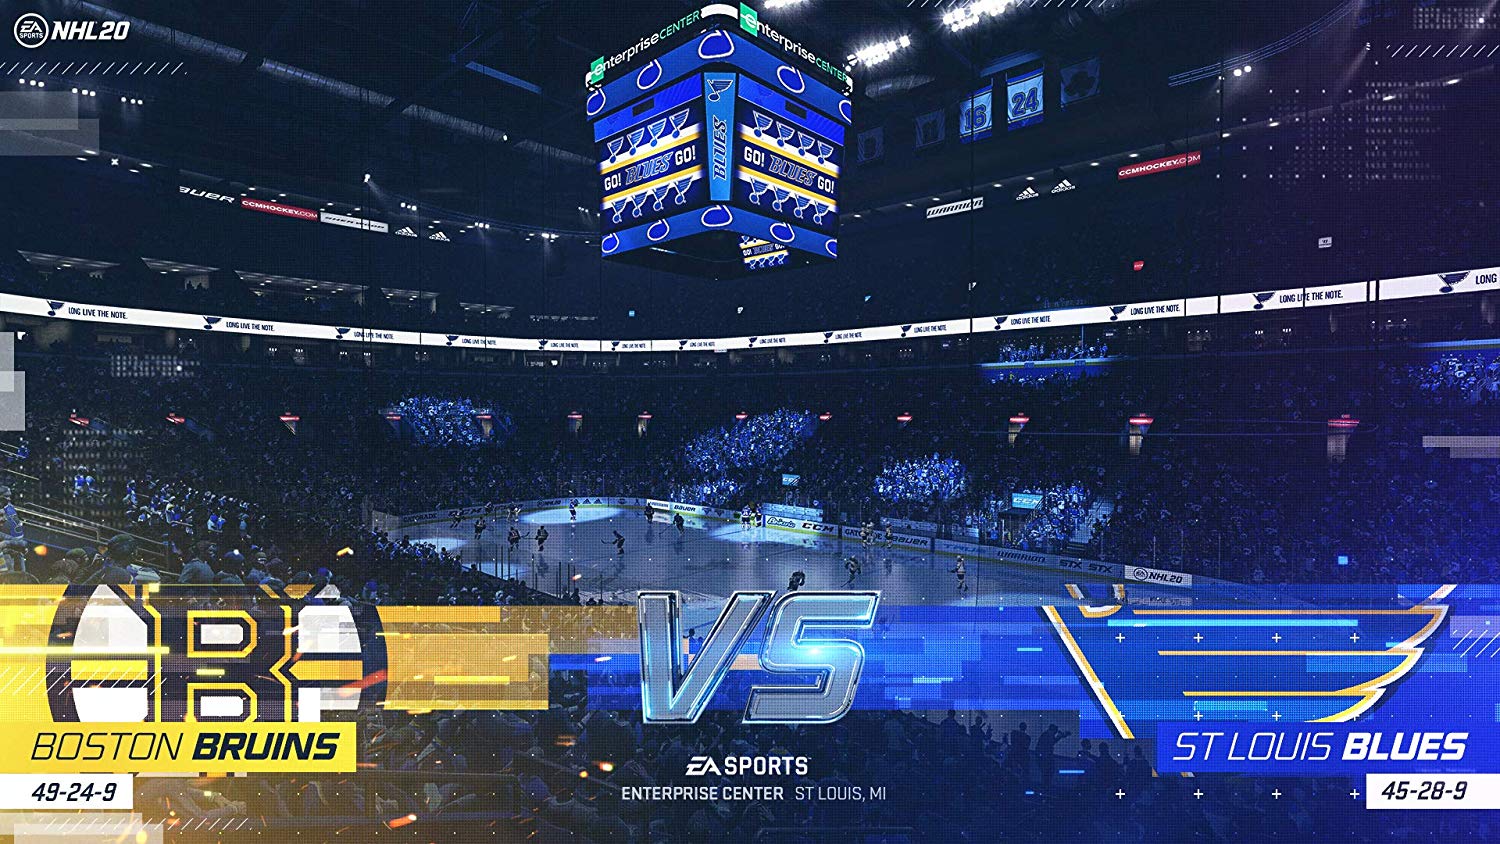 free download ps4 nhl 20